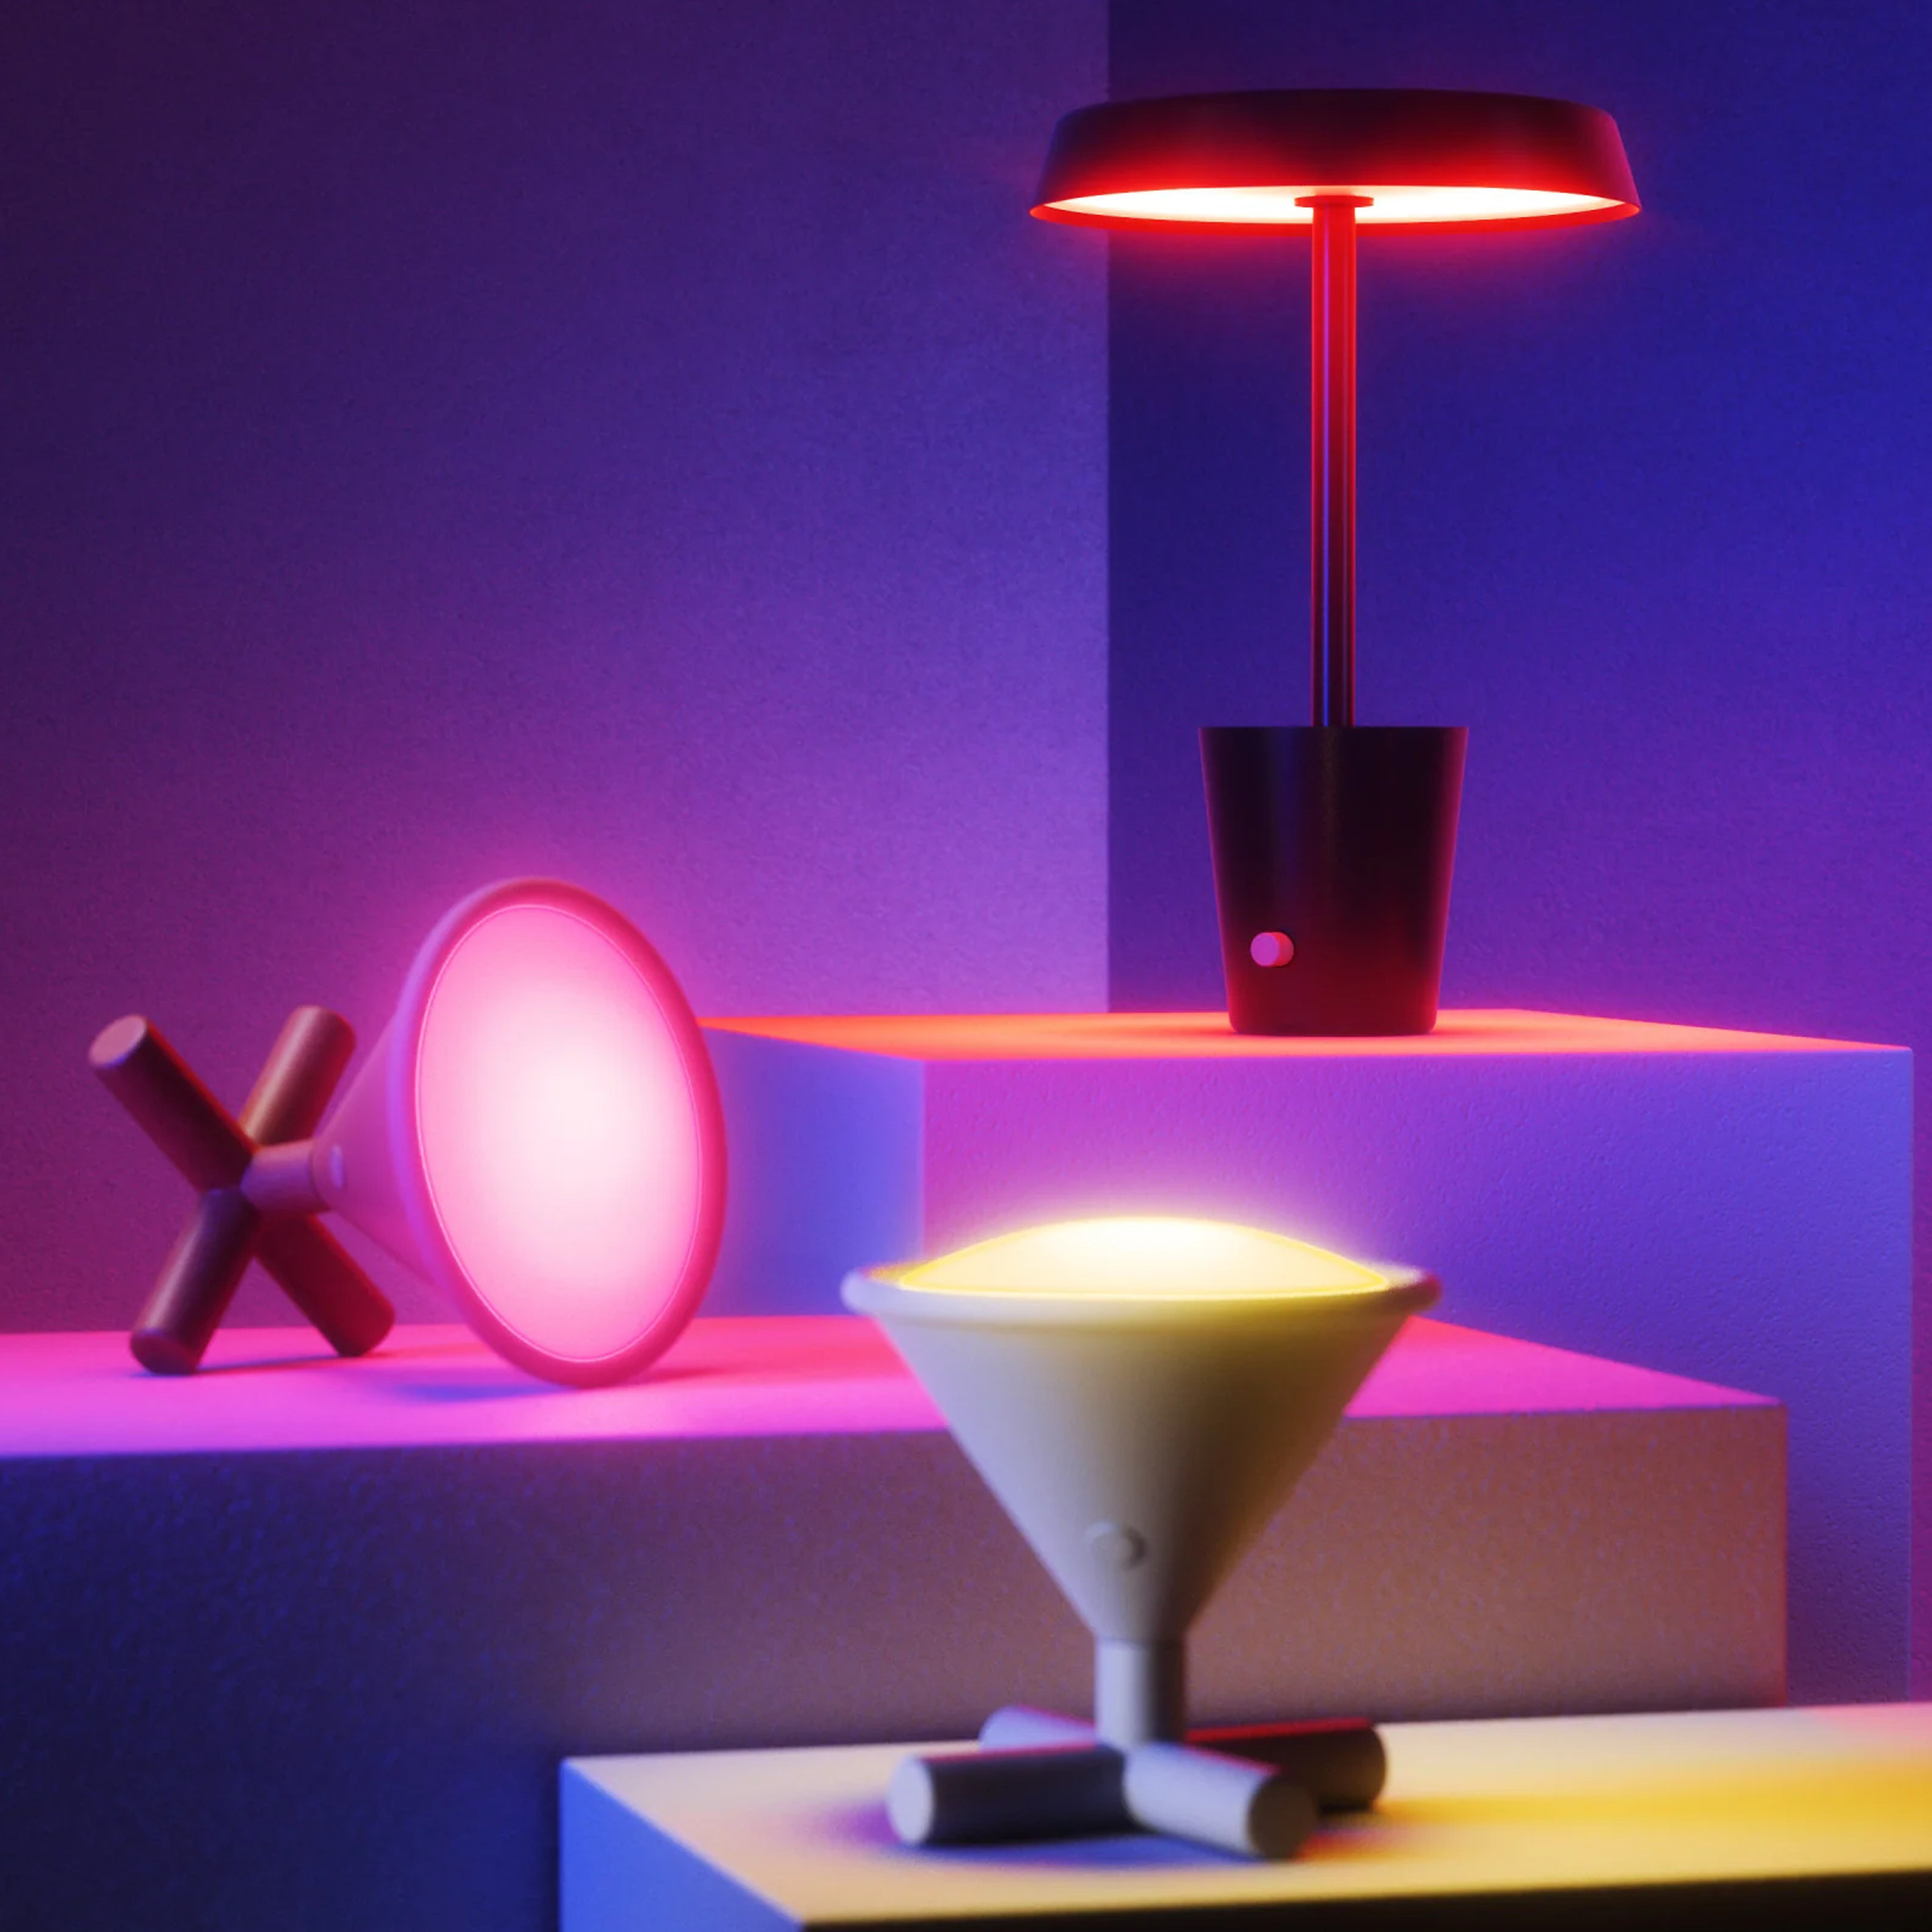 Three colorful smart lamps on shelves of varying heights.